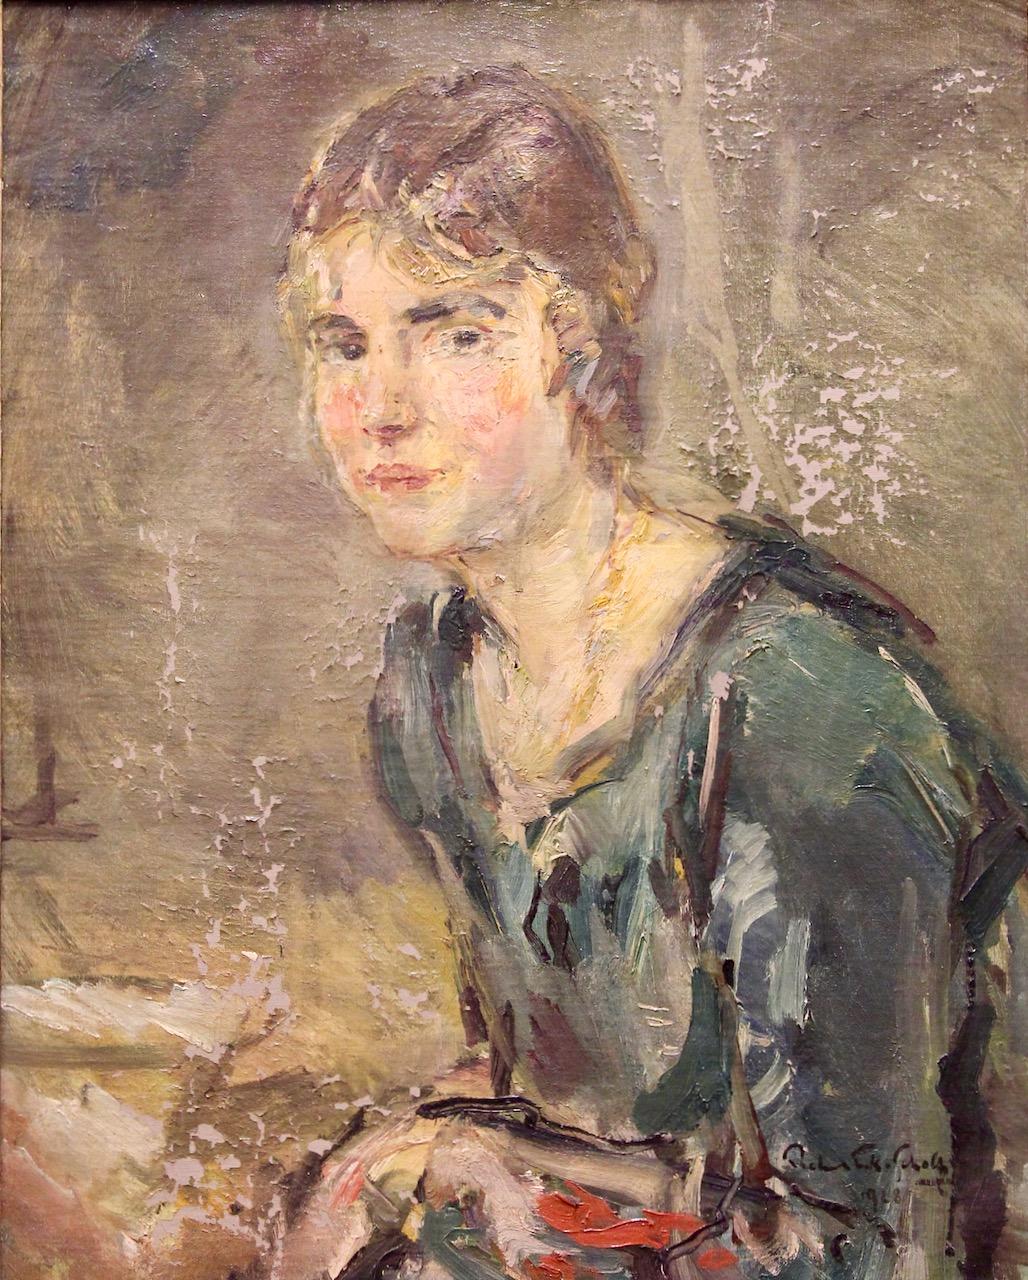 Portrait of a young lady. Oil on canvas. Signed and dated lower right.

Dimensions with frame: 74 cm x 88 cm
Without frame: 57.5 cm x 70.5 cm

The painting has several paint chips and is in need of restoration.

Frame slightly damaged in